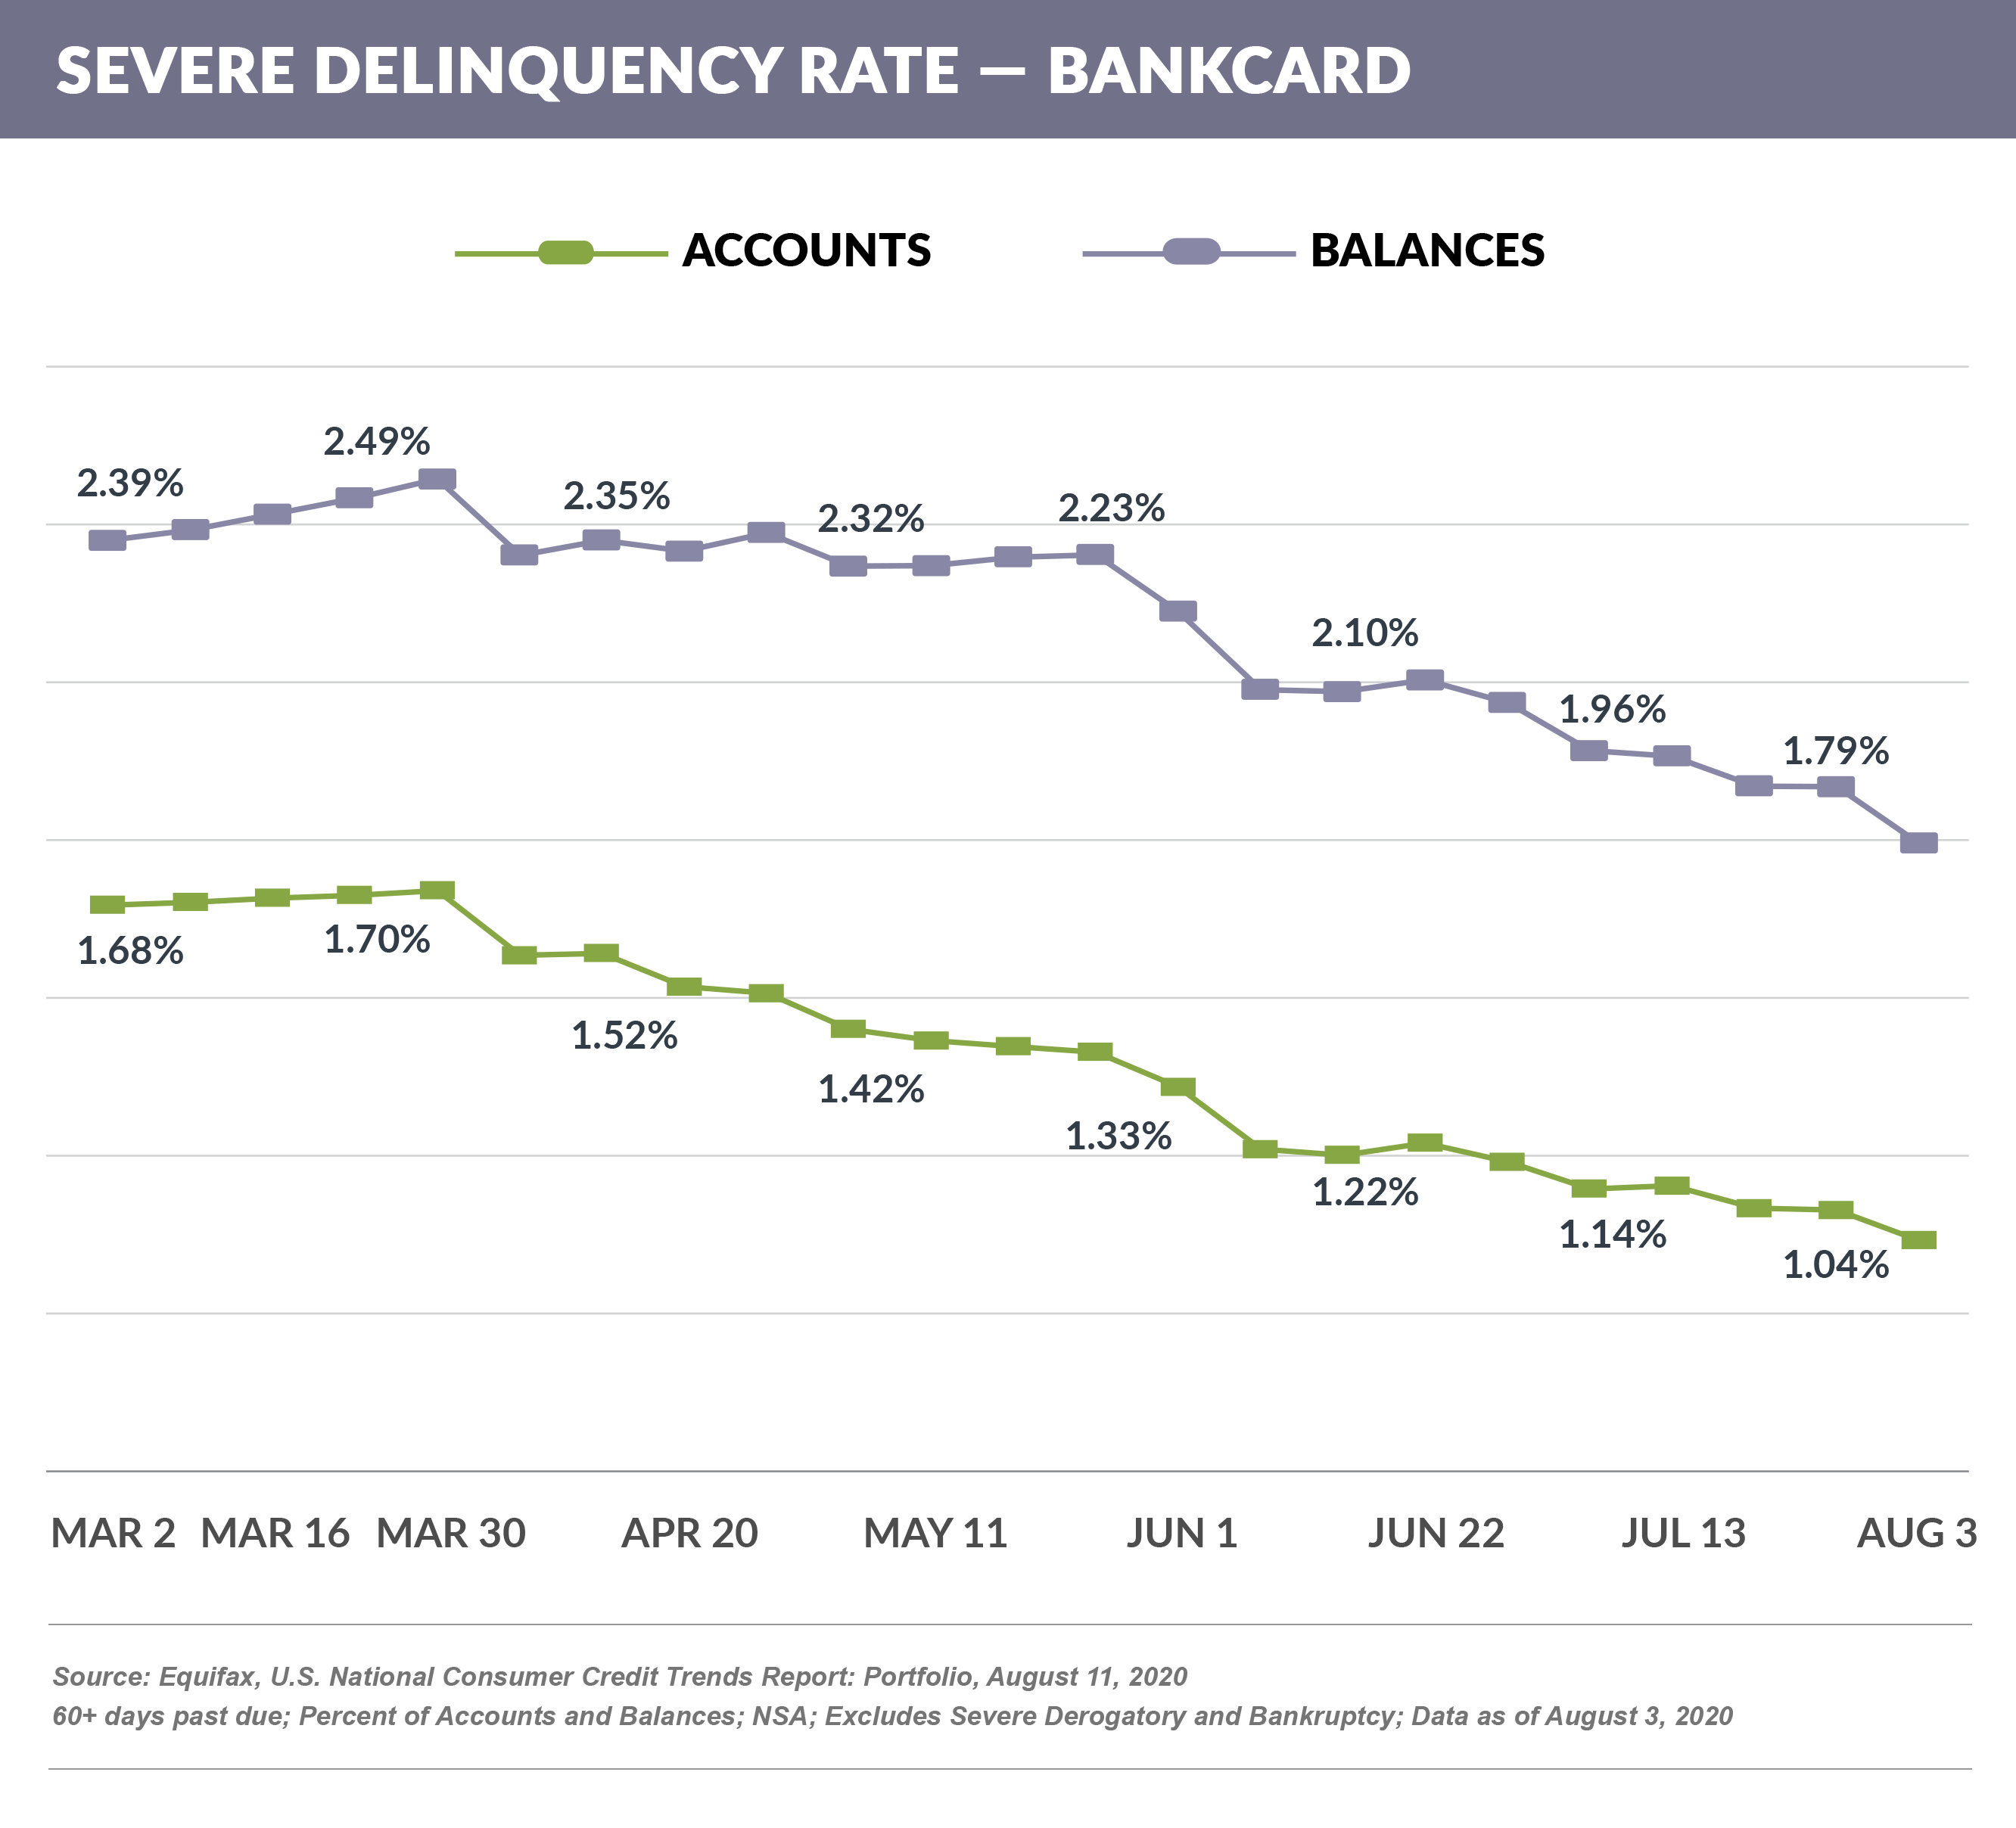 SEVERE DELINQUENCY RATE — BANKCARD